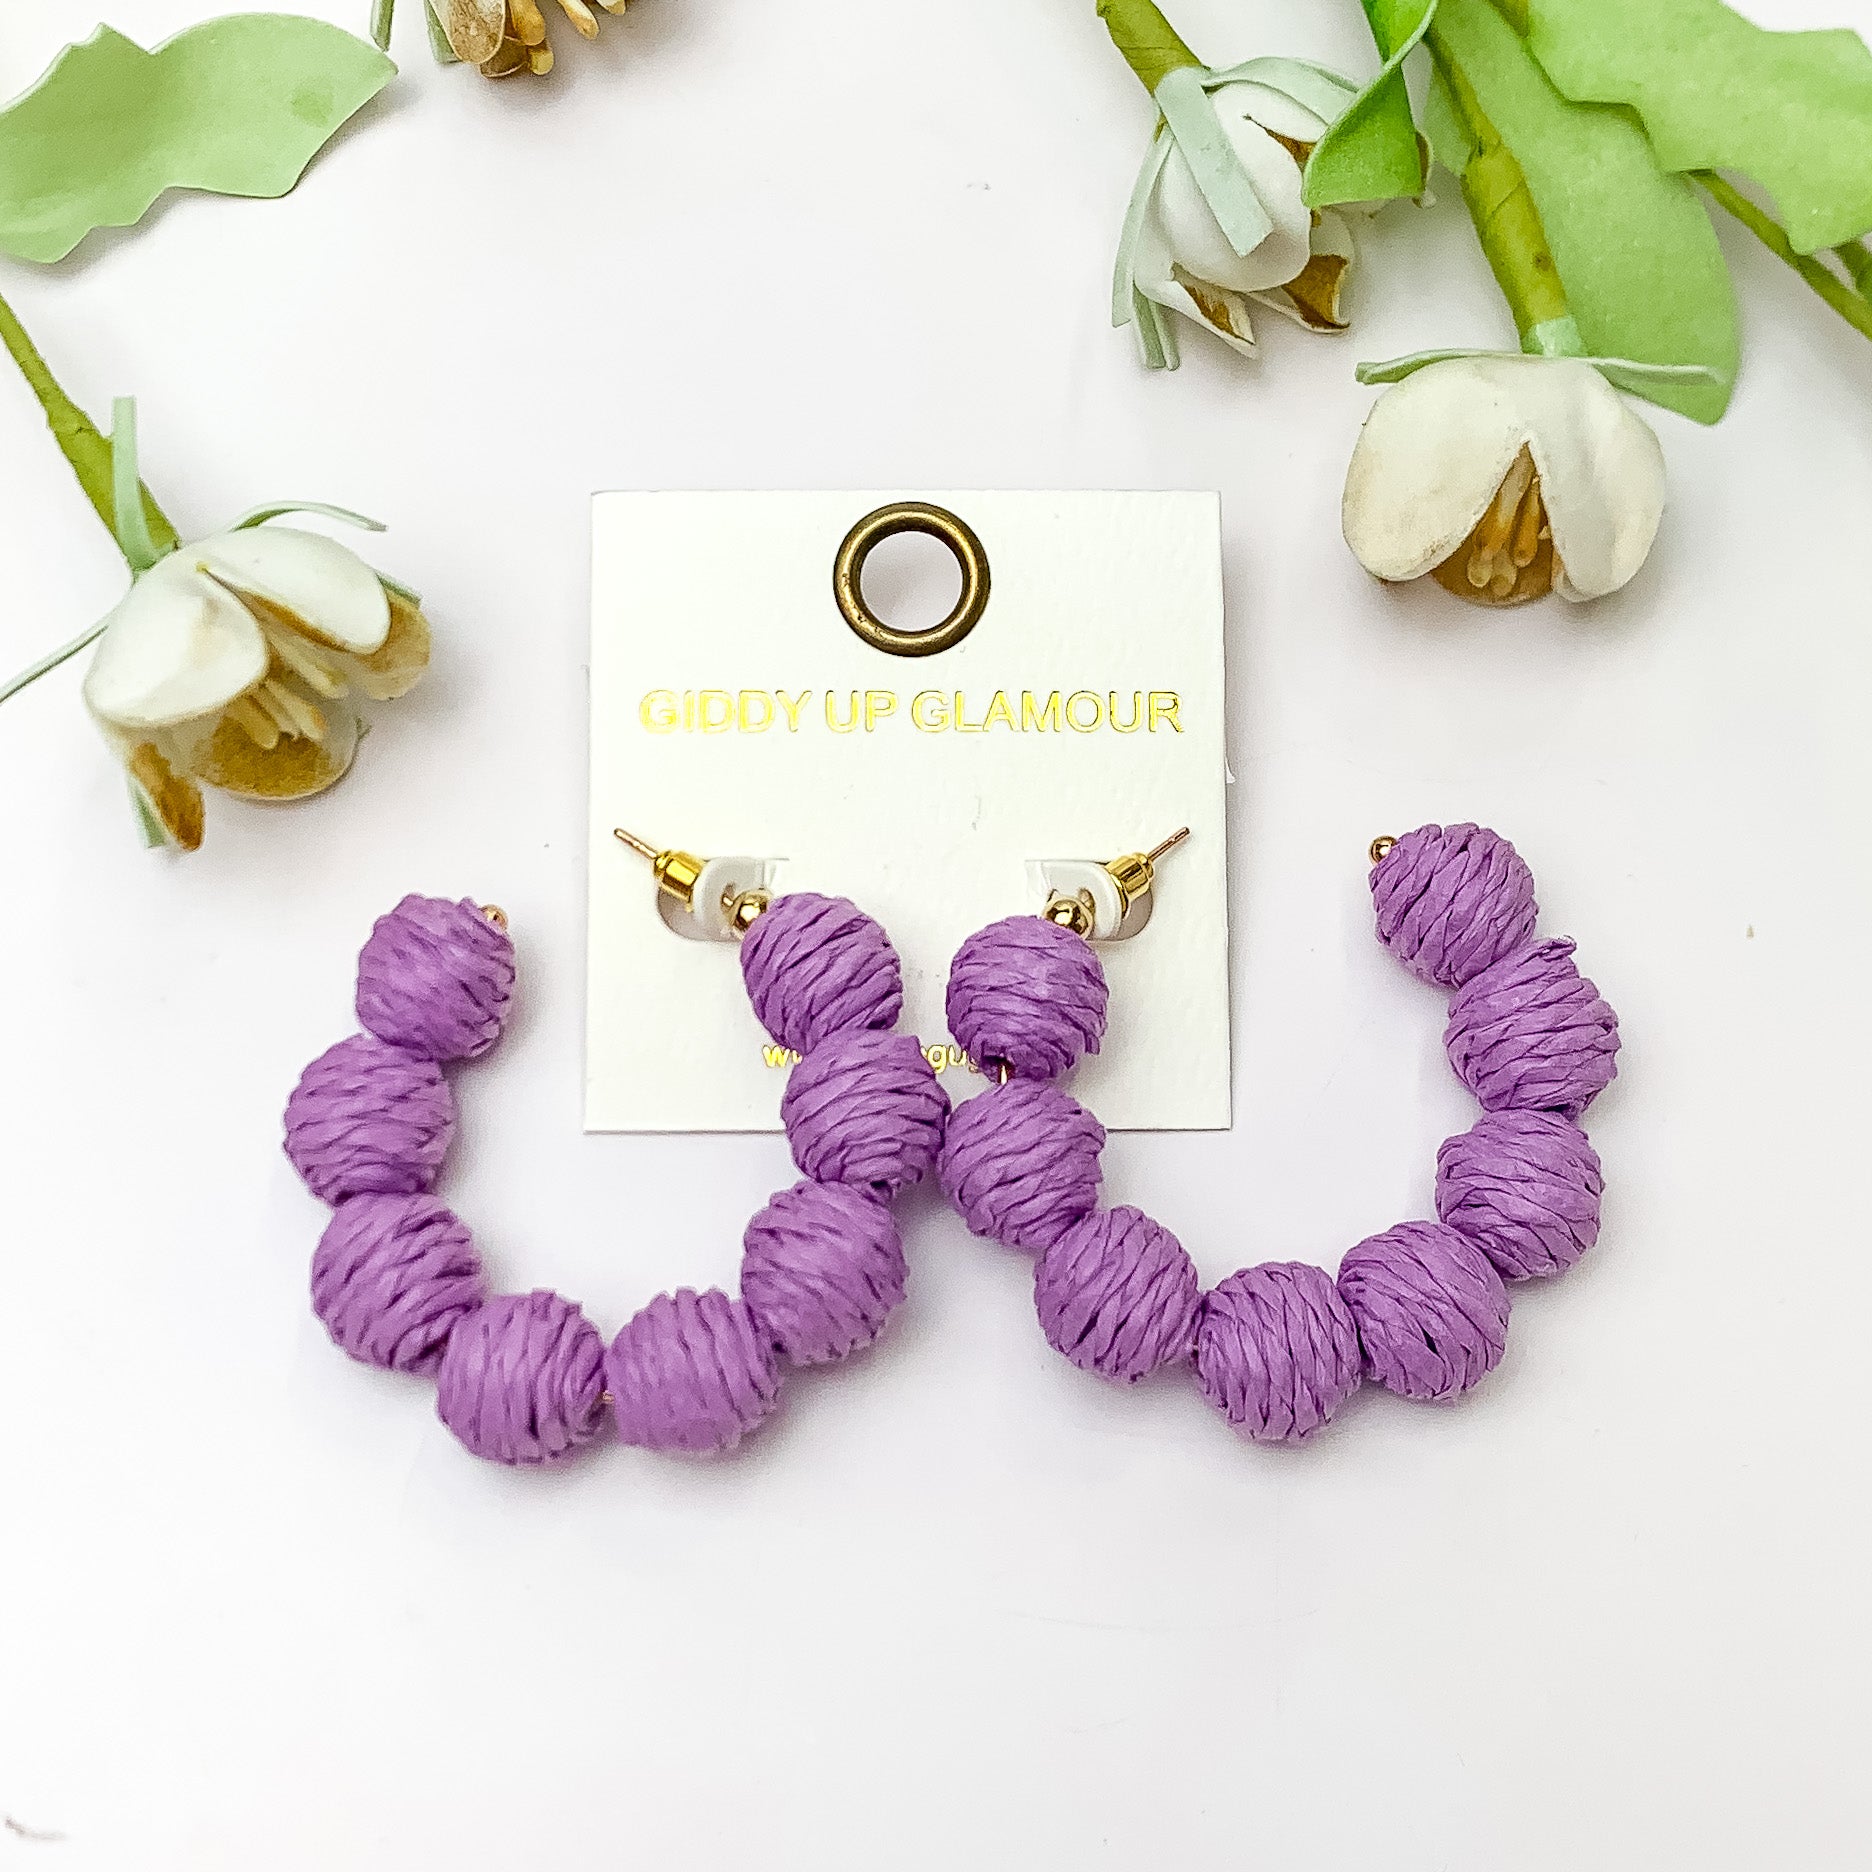 Sorbet Summer Raffia Ball Hoop Earrings in Lavender Purple. Pictured on a white background with flowers above the earrings.